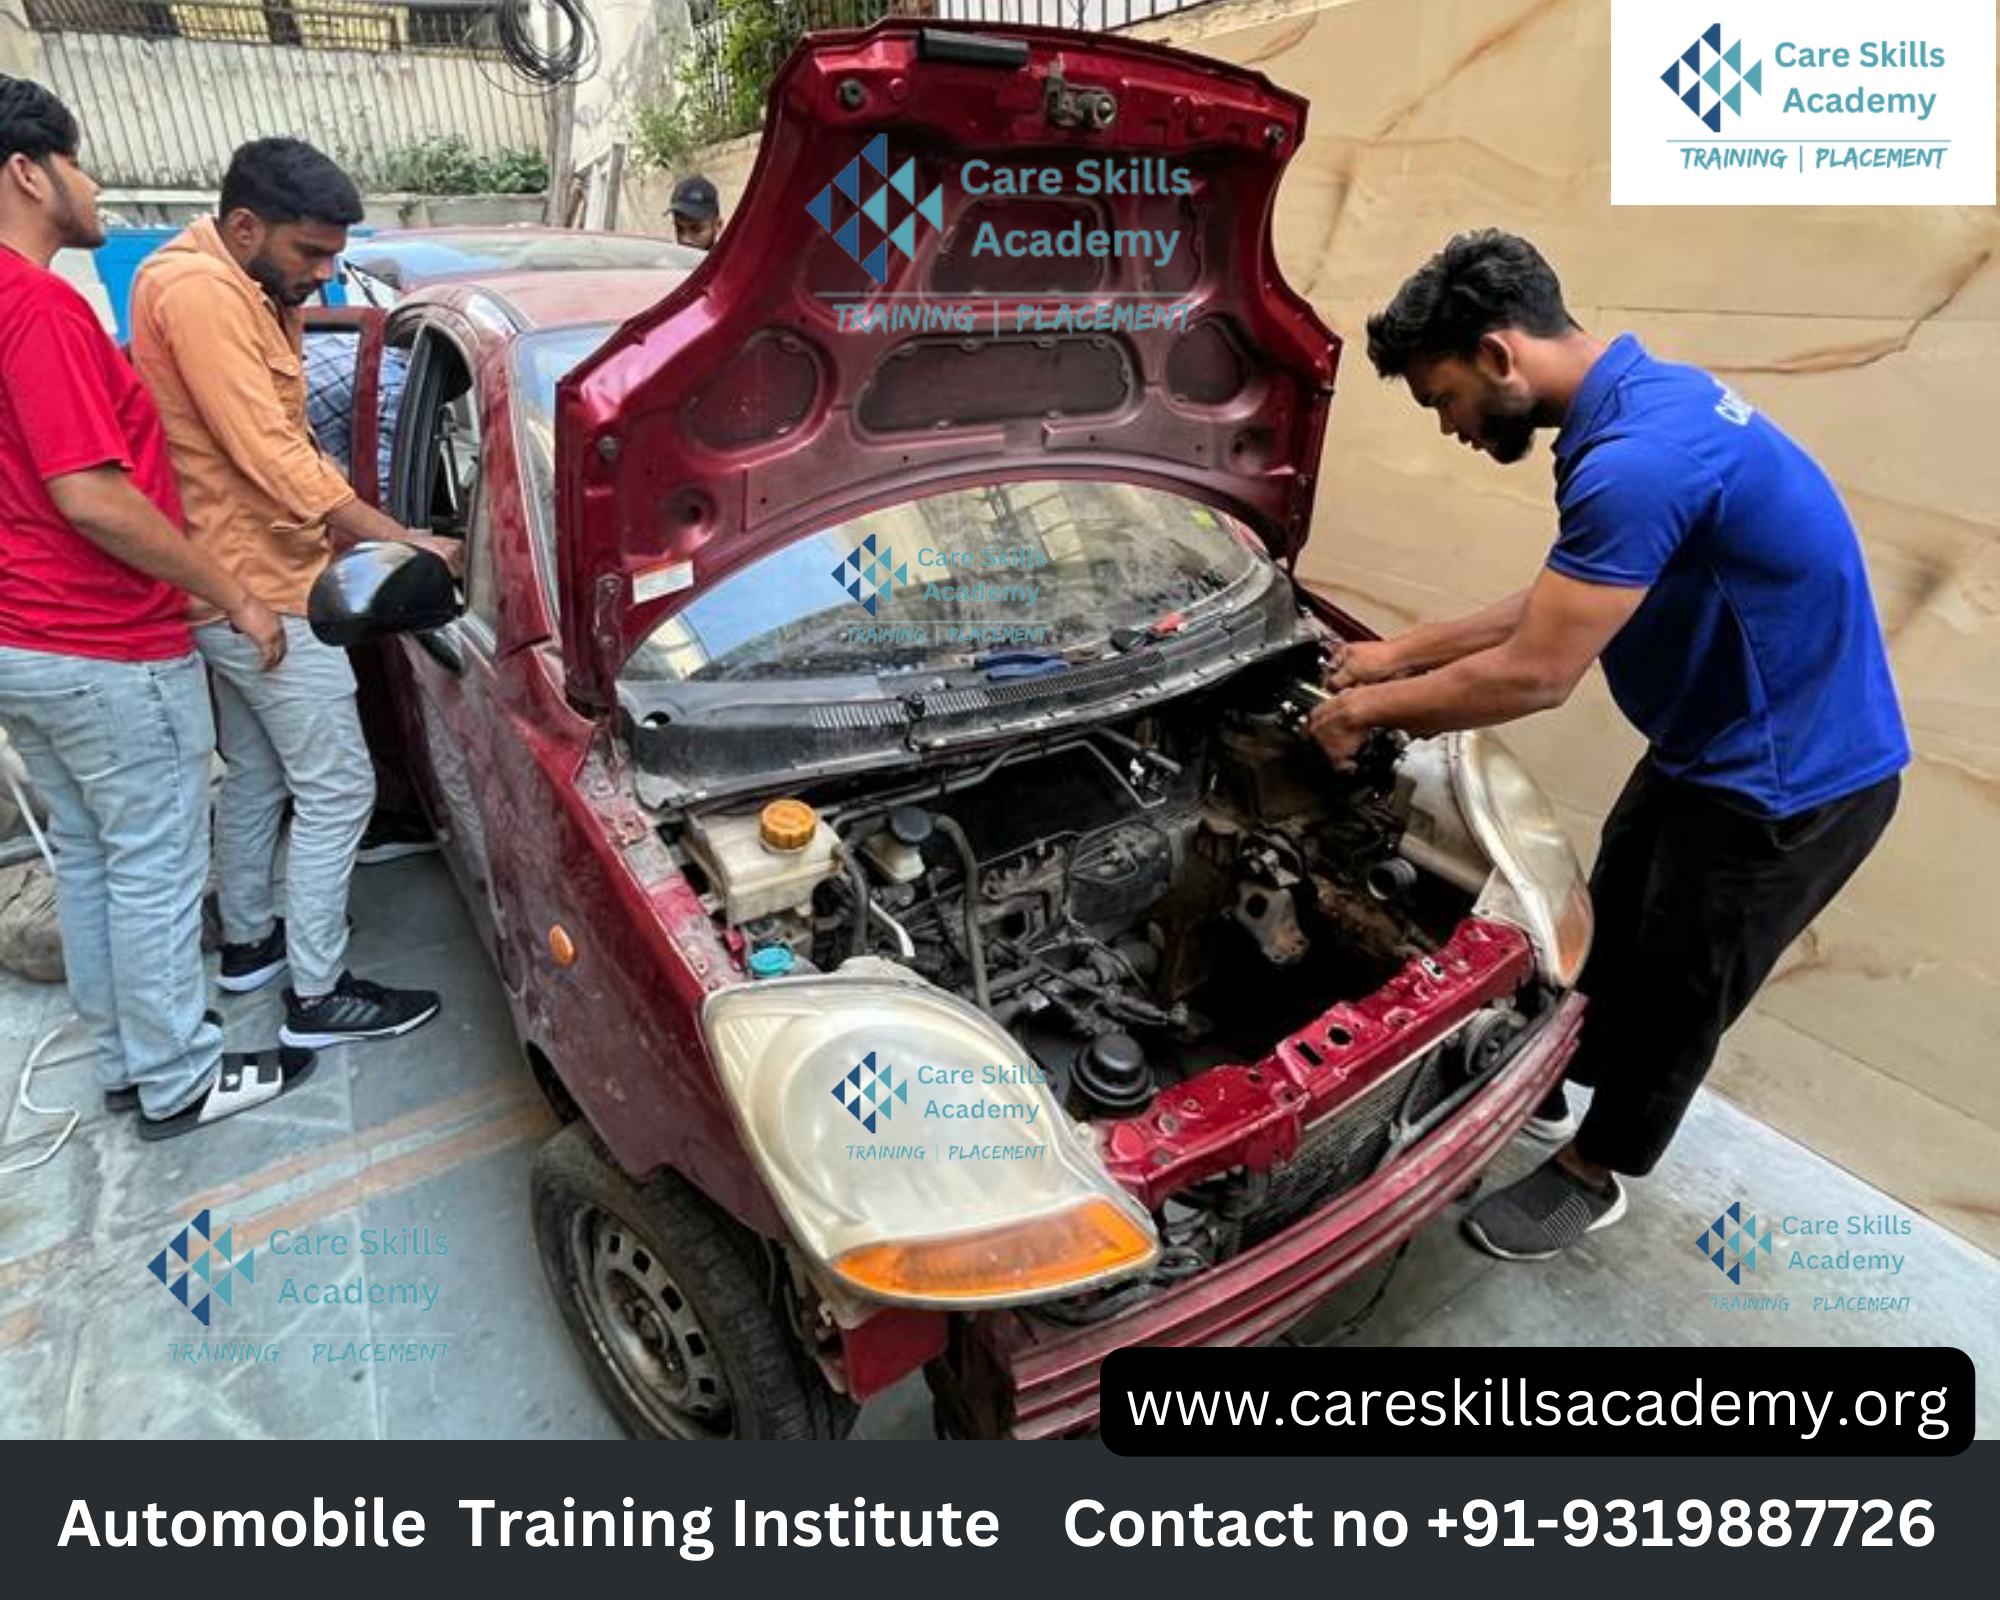 Why You Should Enroll in an Automotive Technician Course in Delhi?